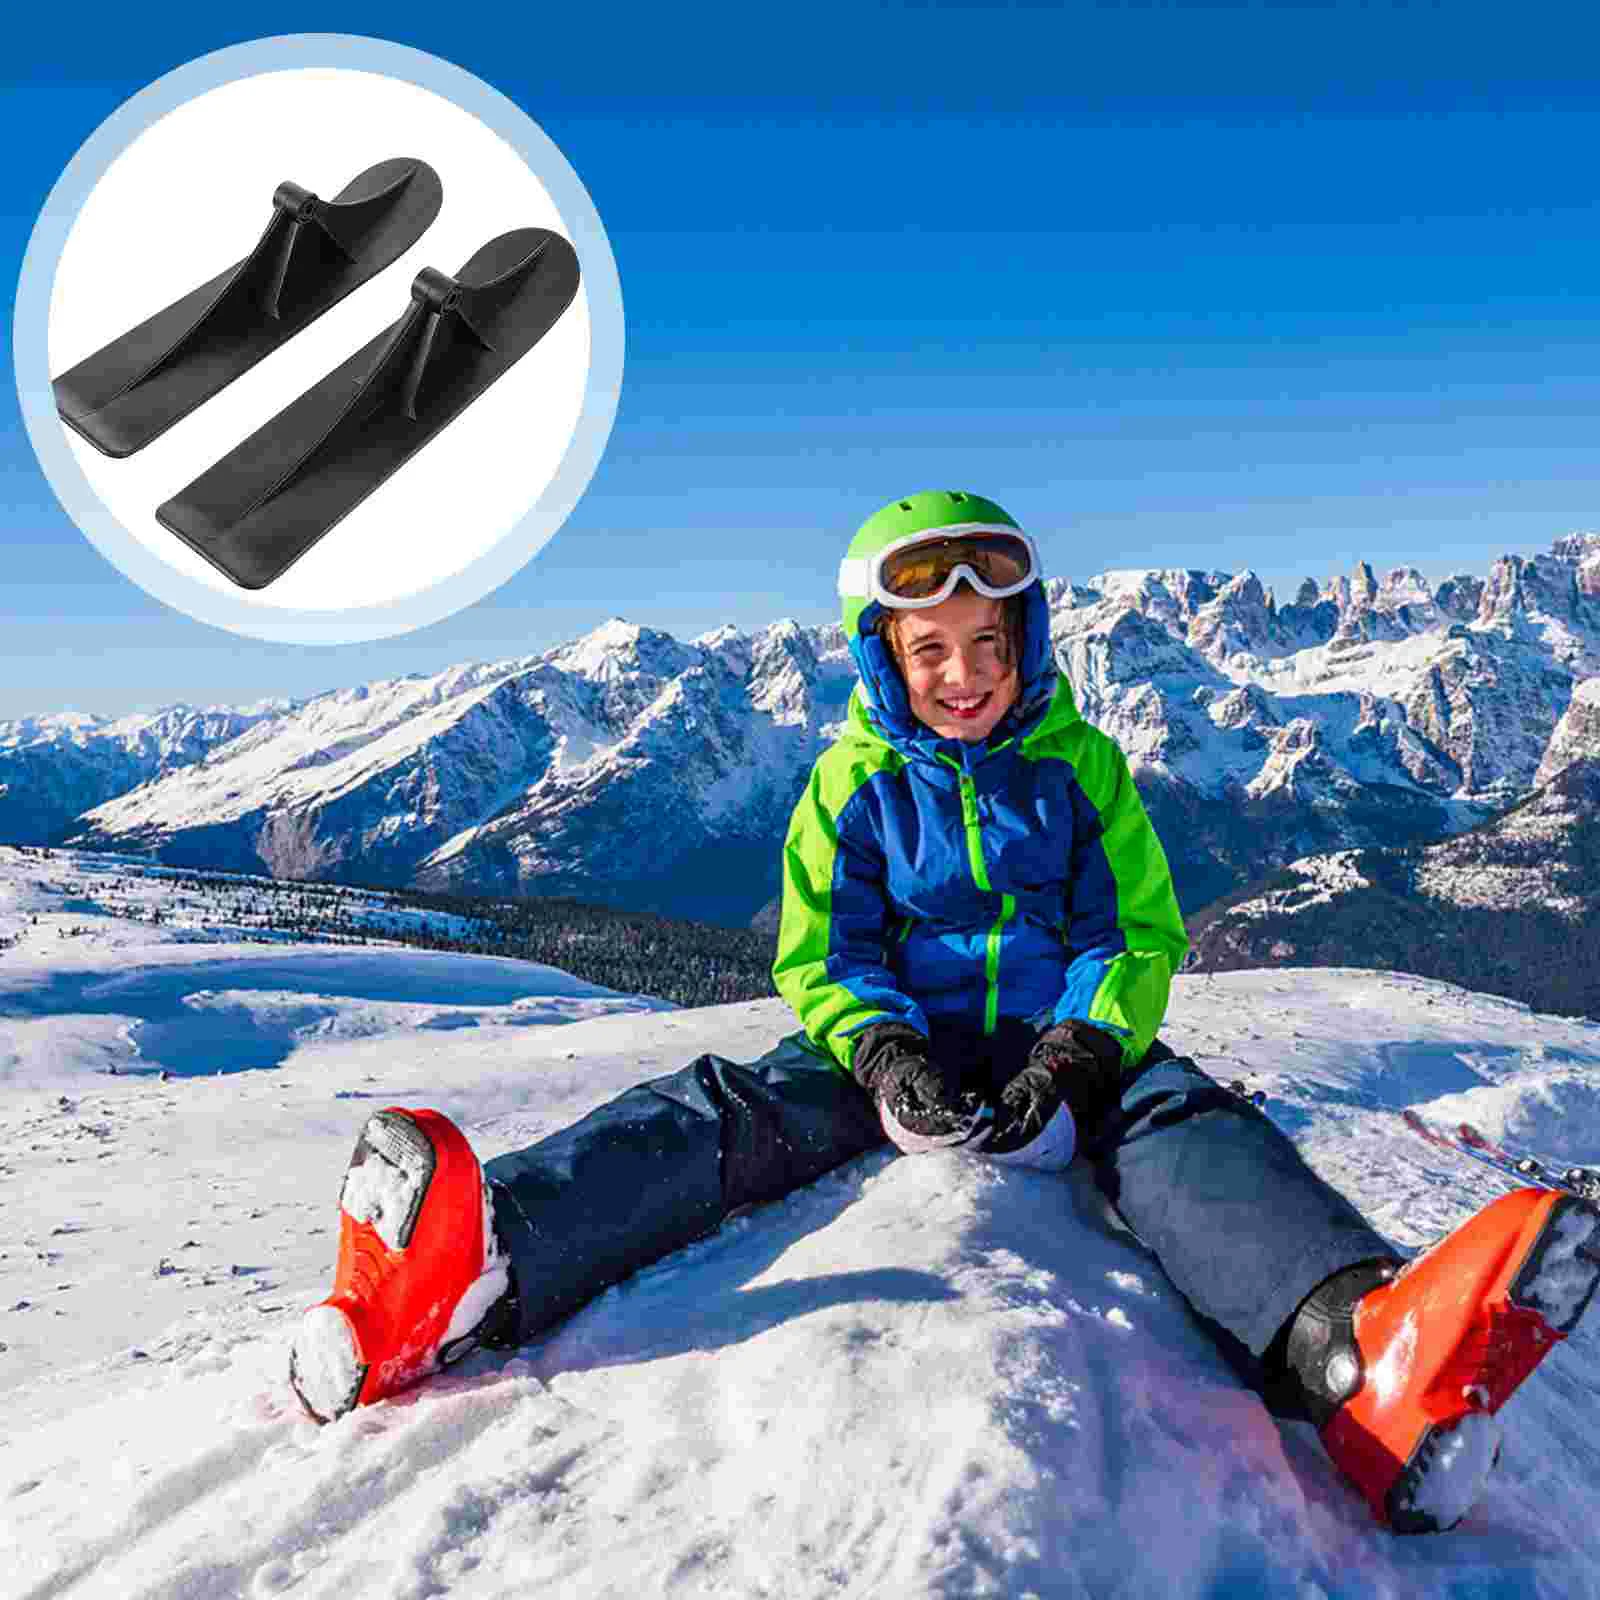 new top 3cm thickness sole stable mini ski skates adjustable bindings snowboards winter cross country skis alpine skis snow sled Snow Sled Ski Scooter Kit Ski Skate Board Ski Sled Scooter Ski Wheel